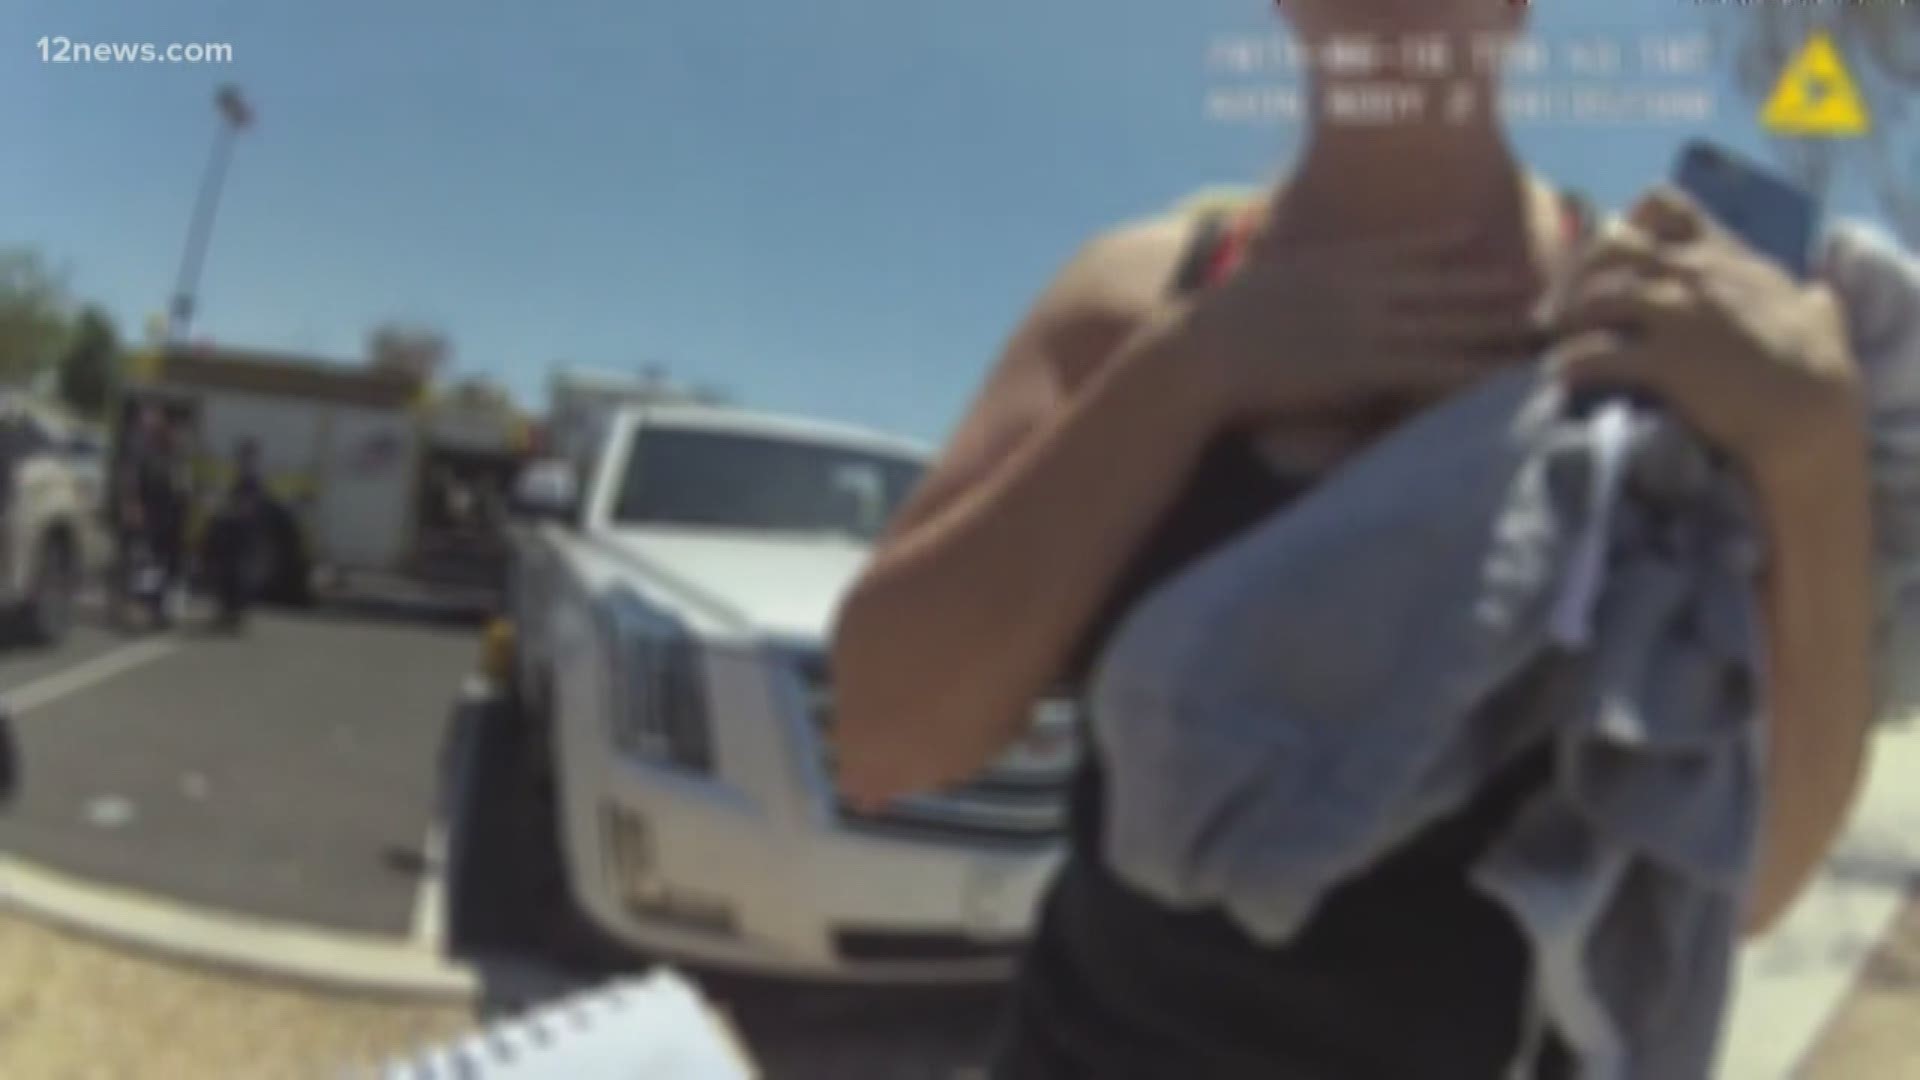 Police released body camera footage from the June arrest of a mother who said she accidentally left her 5-month-old in a car in a Goodyear Target parking lot when she, her sister and other daughter went into the store. The infant was taken to the hospital in stable condition.